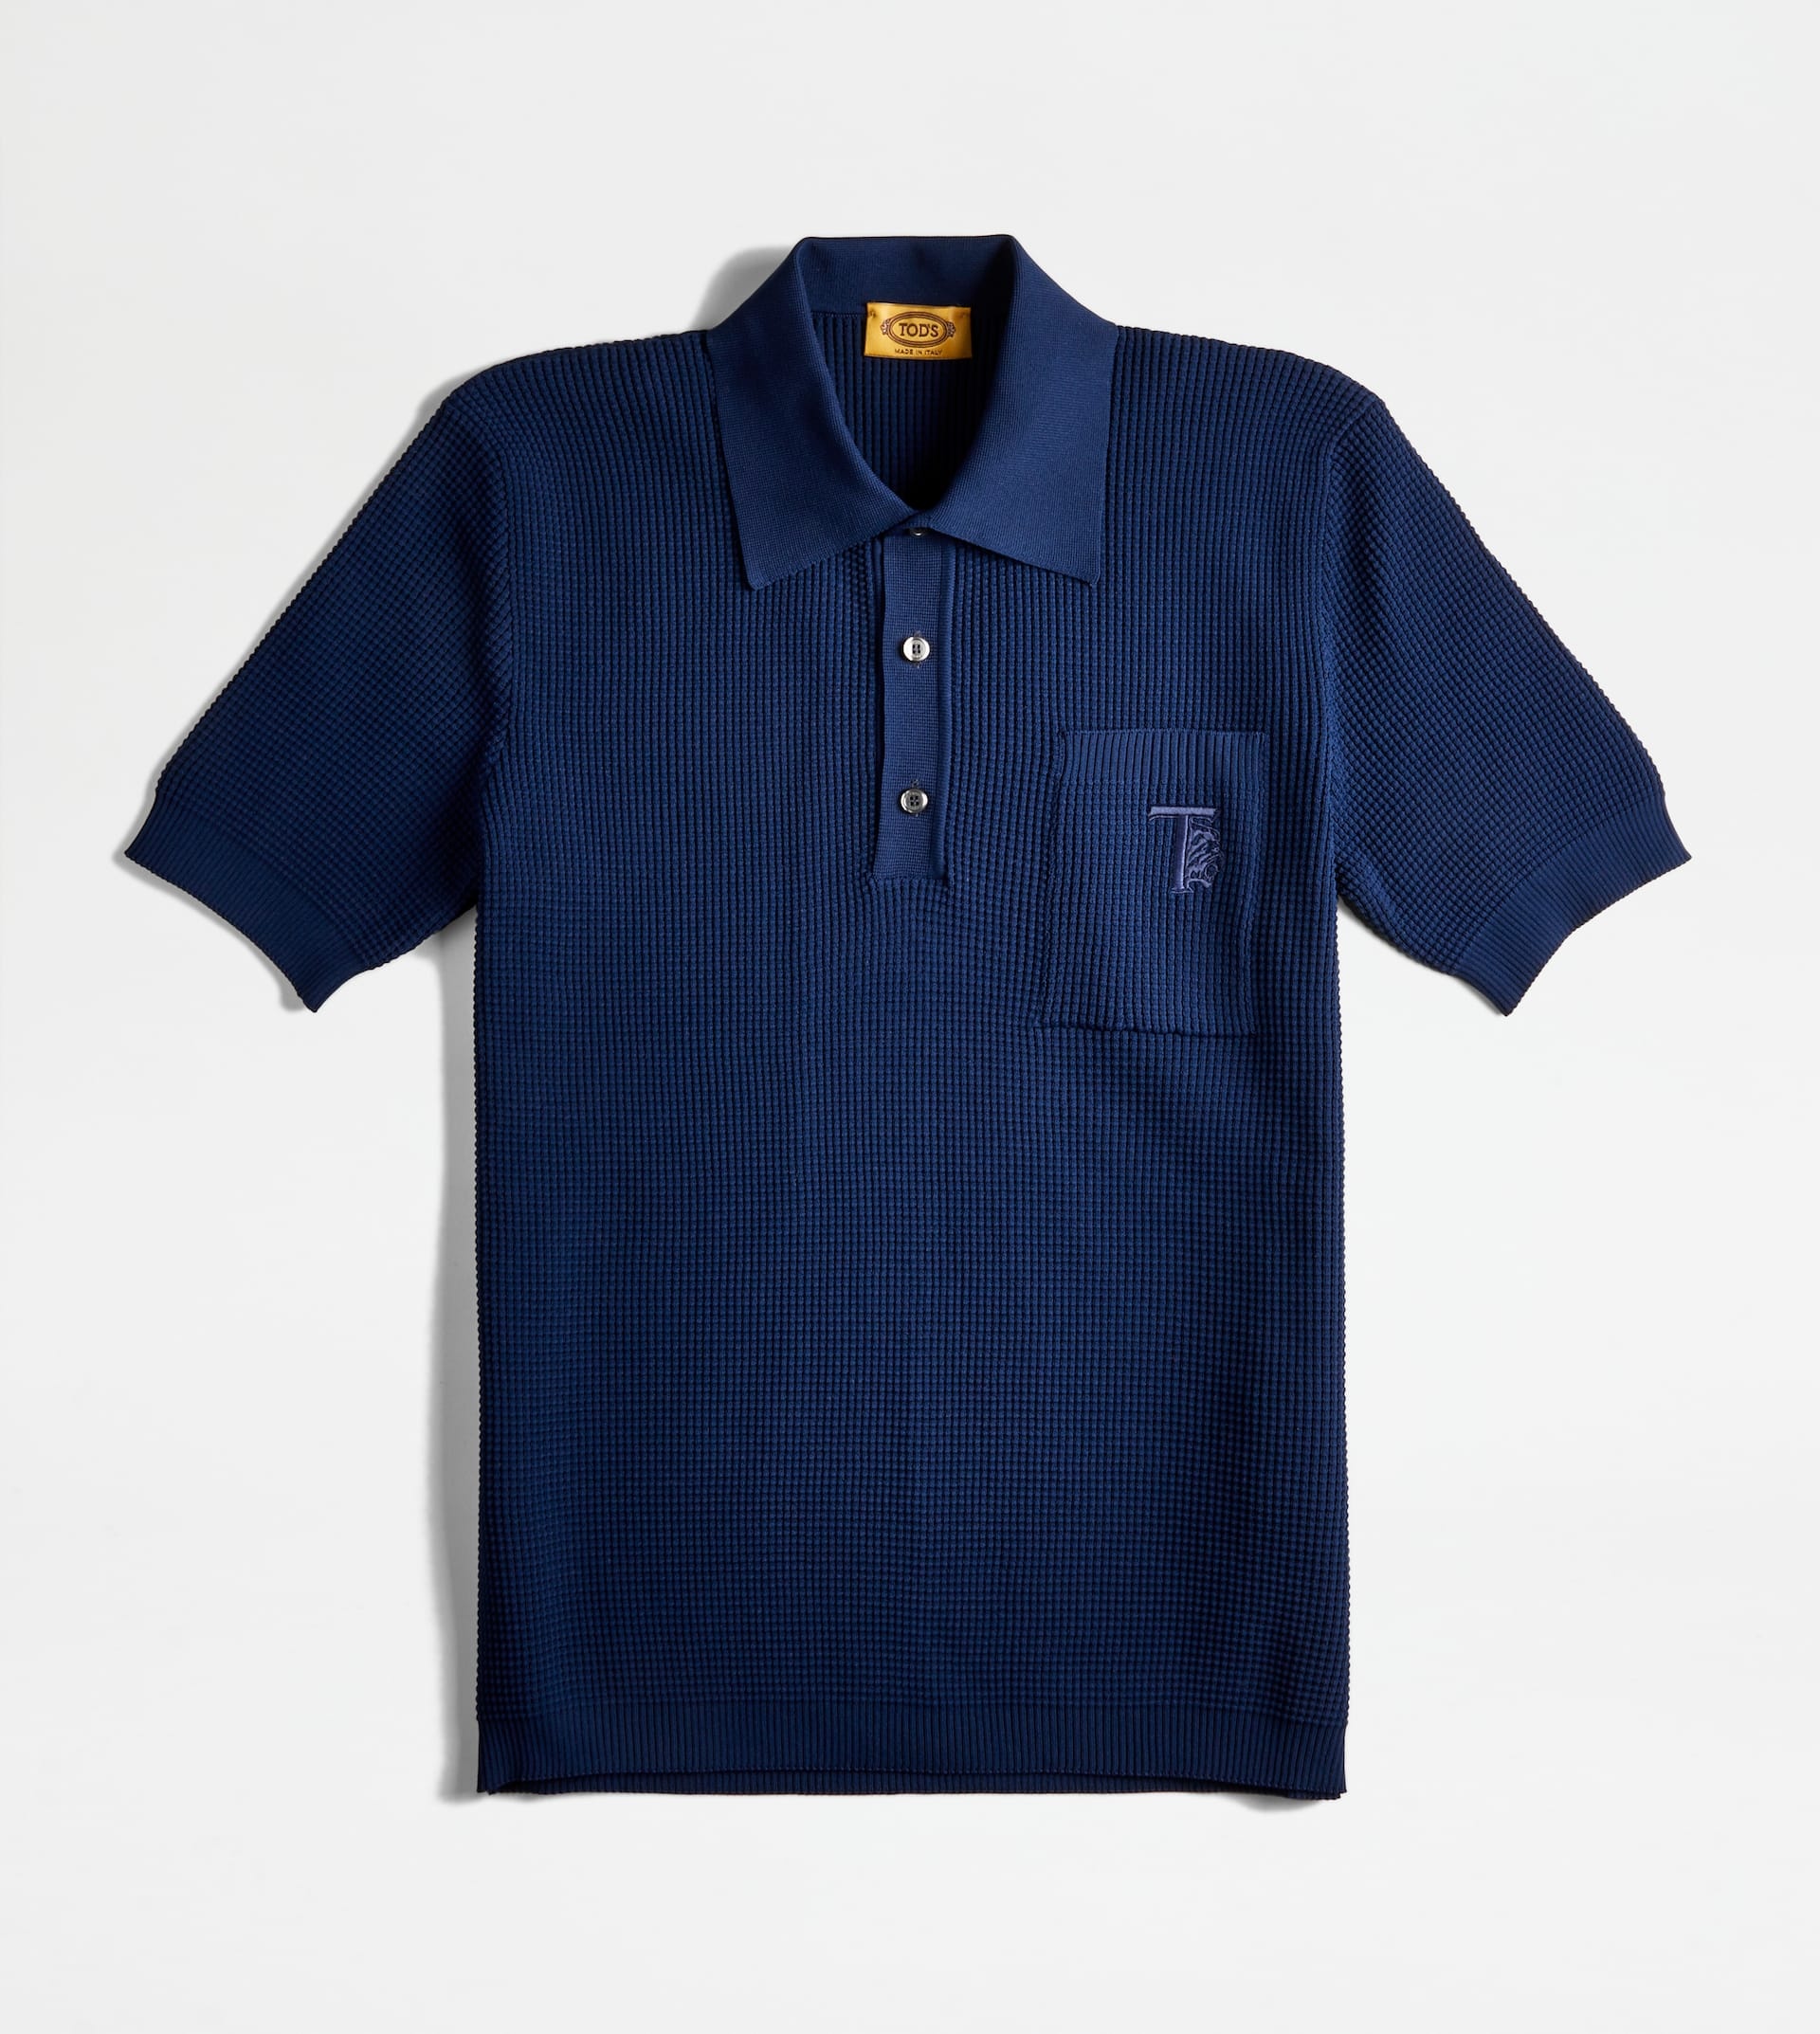 POLO SHIRT IN KNIT - BLUE - 1